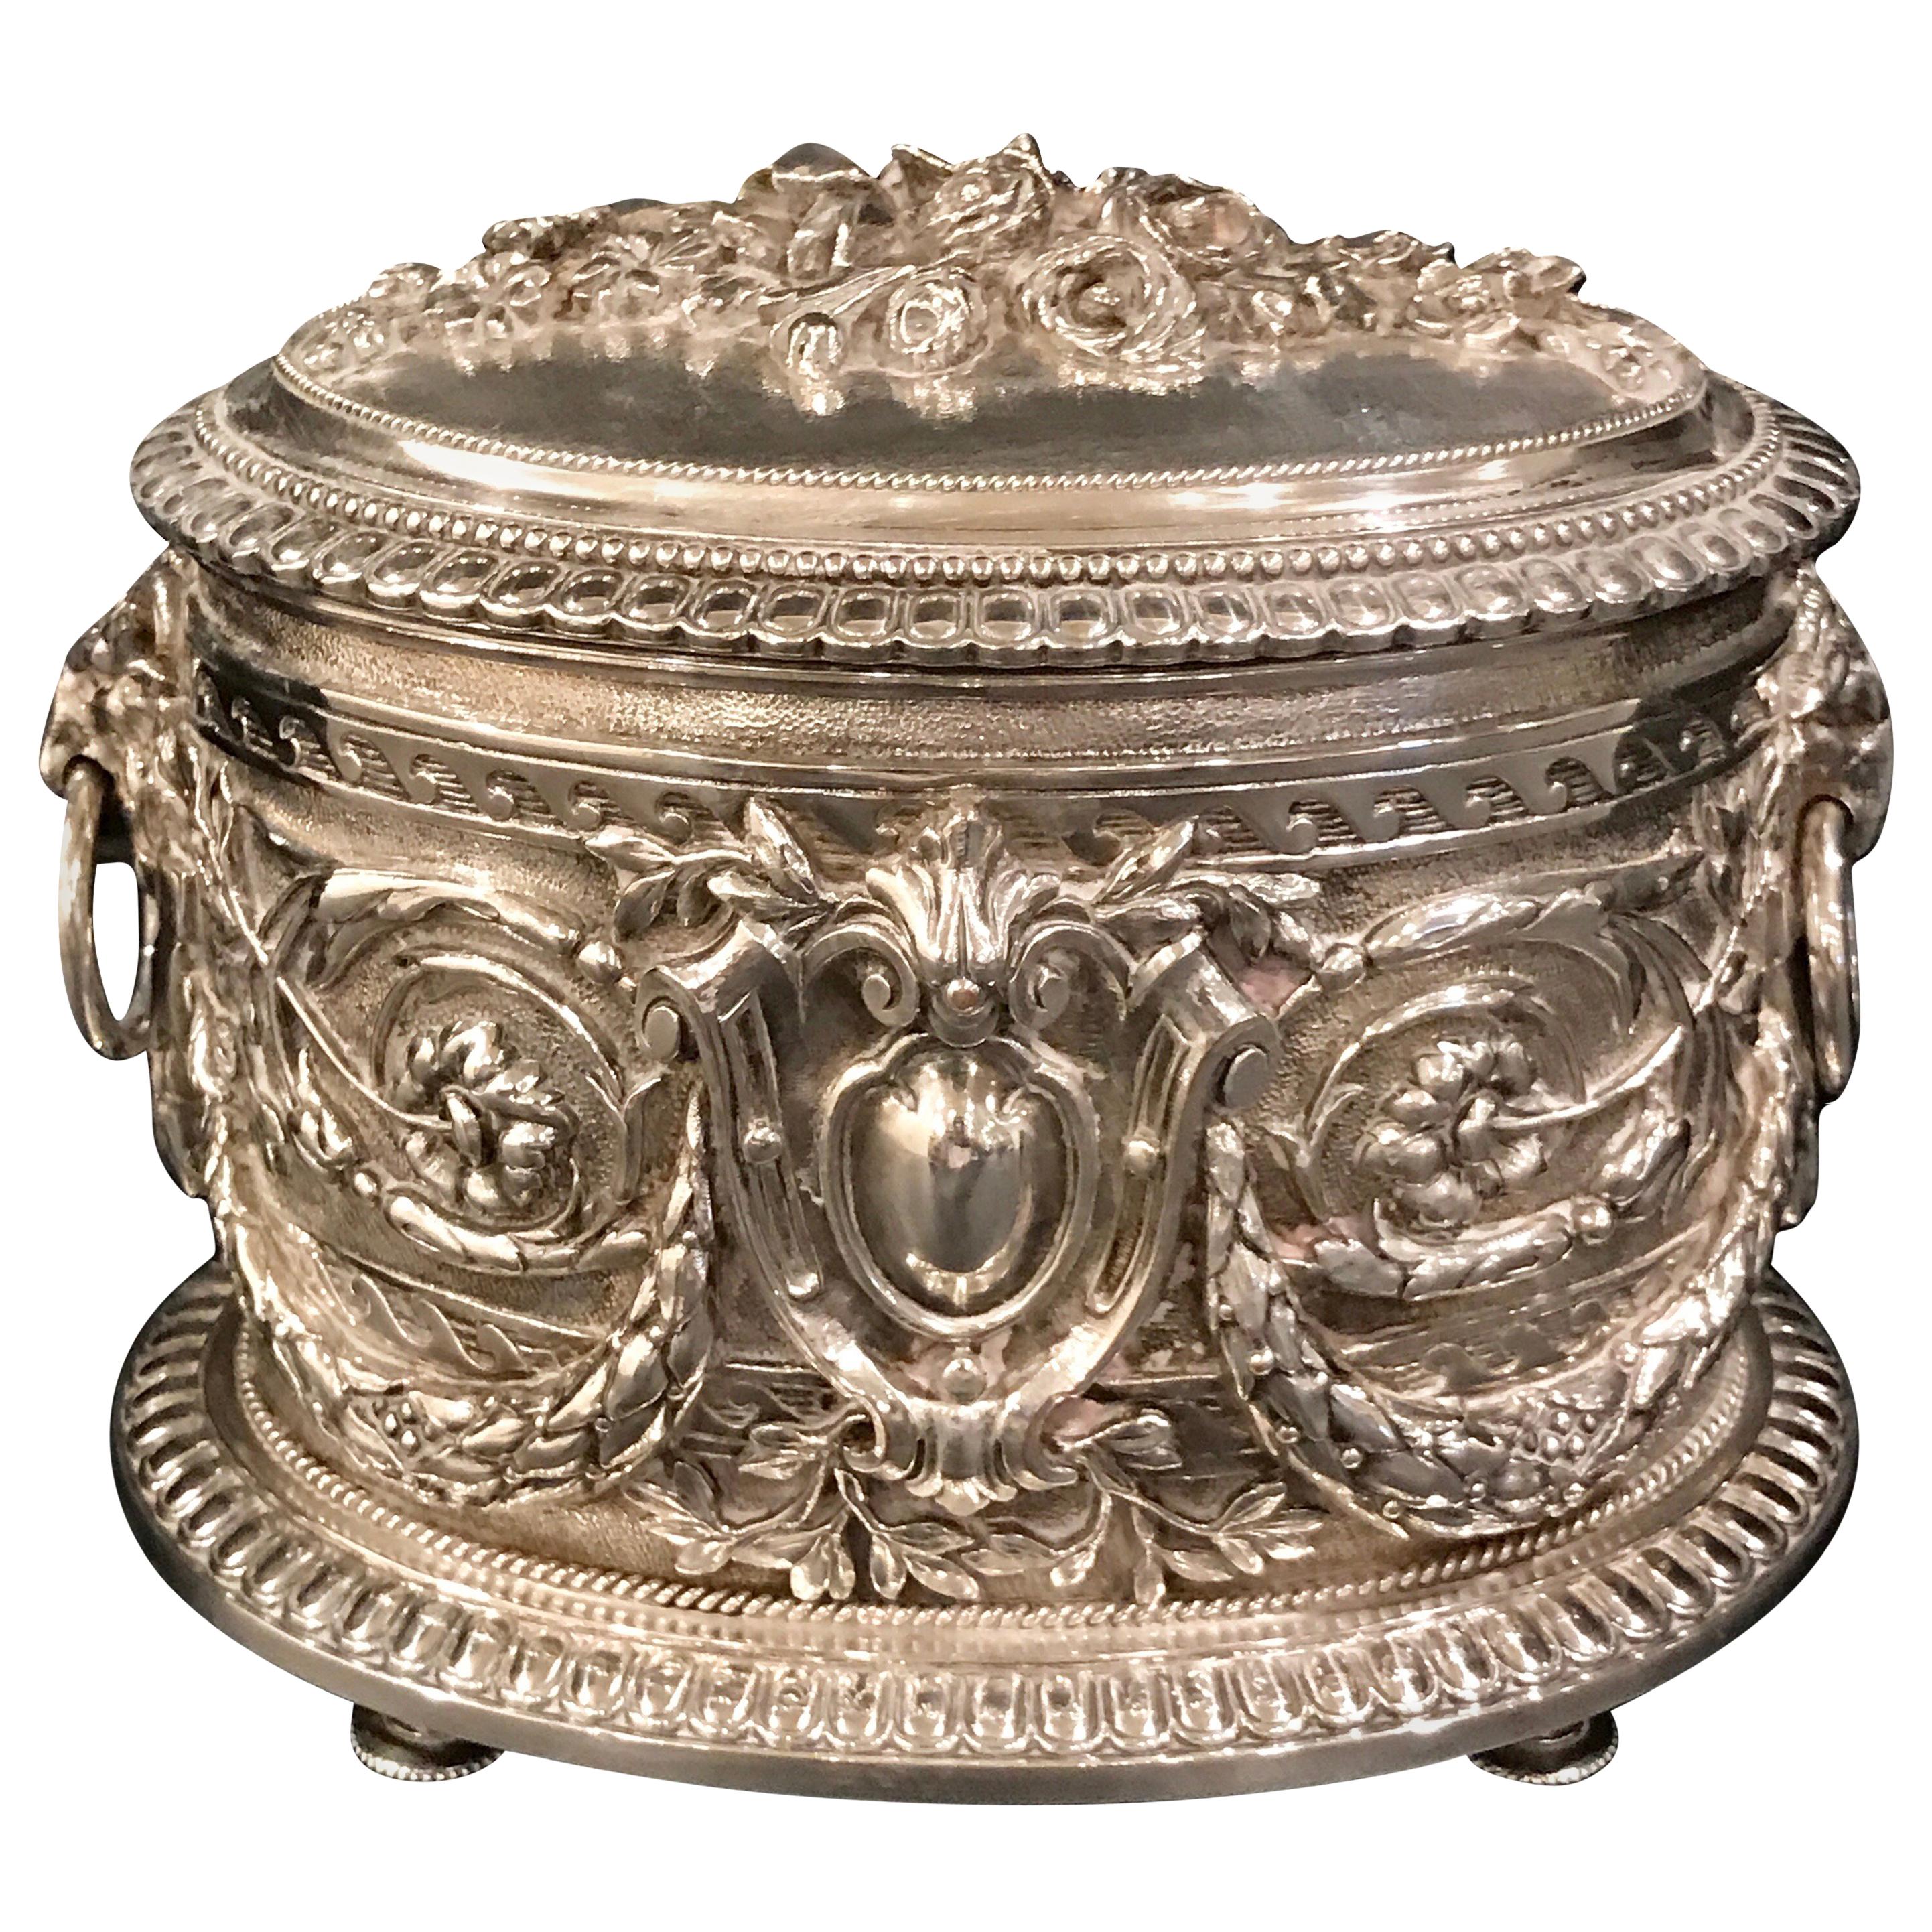 English Silverplated Ornate Table Box by Hukin and Heath